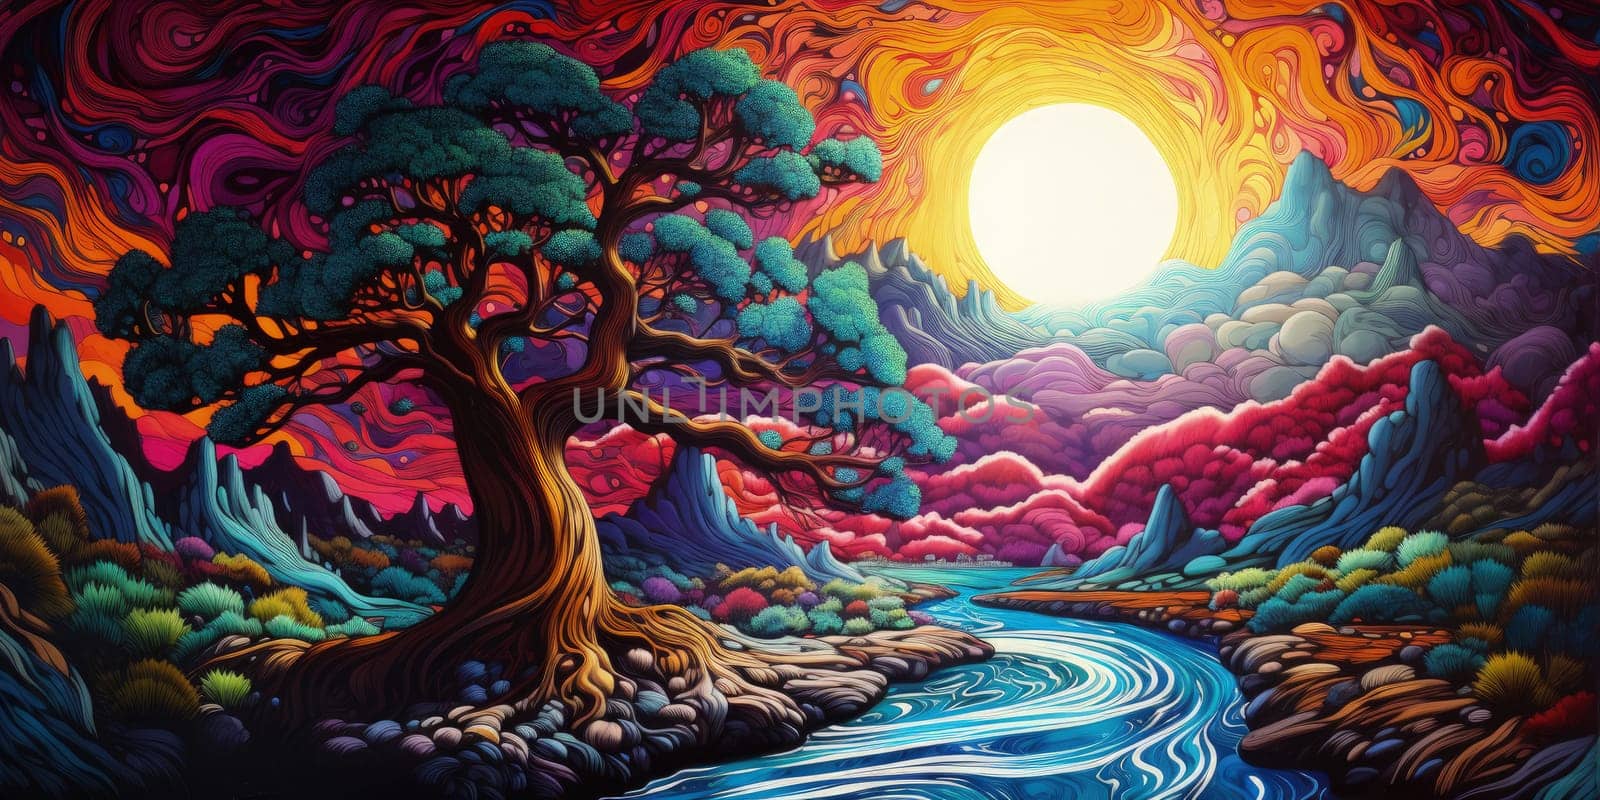 A hyper-realistic depiction of nature in a hydrodip style, where trees, mountains, and rivers are intricately painted with swirling patterns and vibrant colors